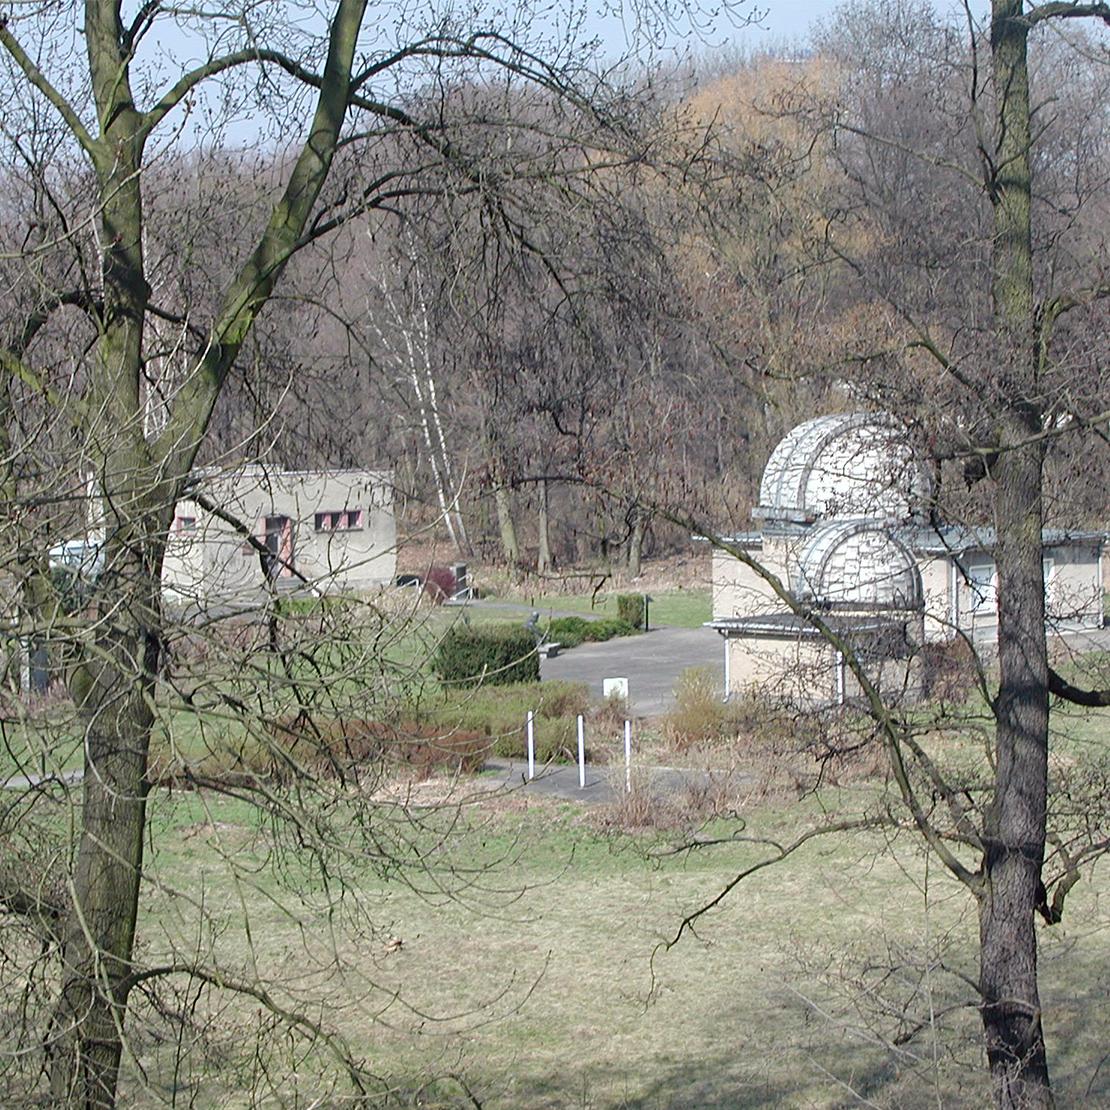 Between 1960 and 1965, further buildings are erected on the open-air site of the Archenhold-Observatory. © SPB / Photo: E. Rothenberg